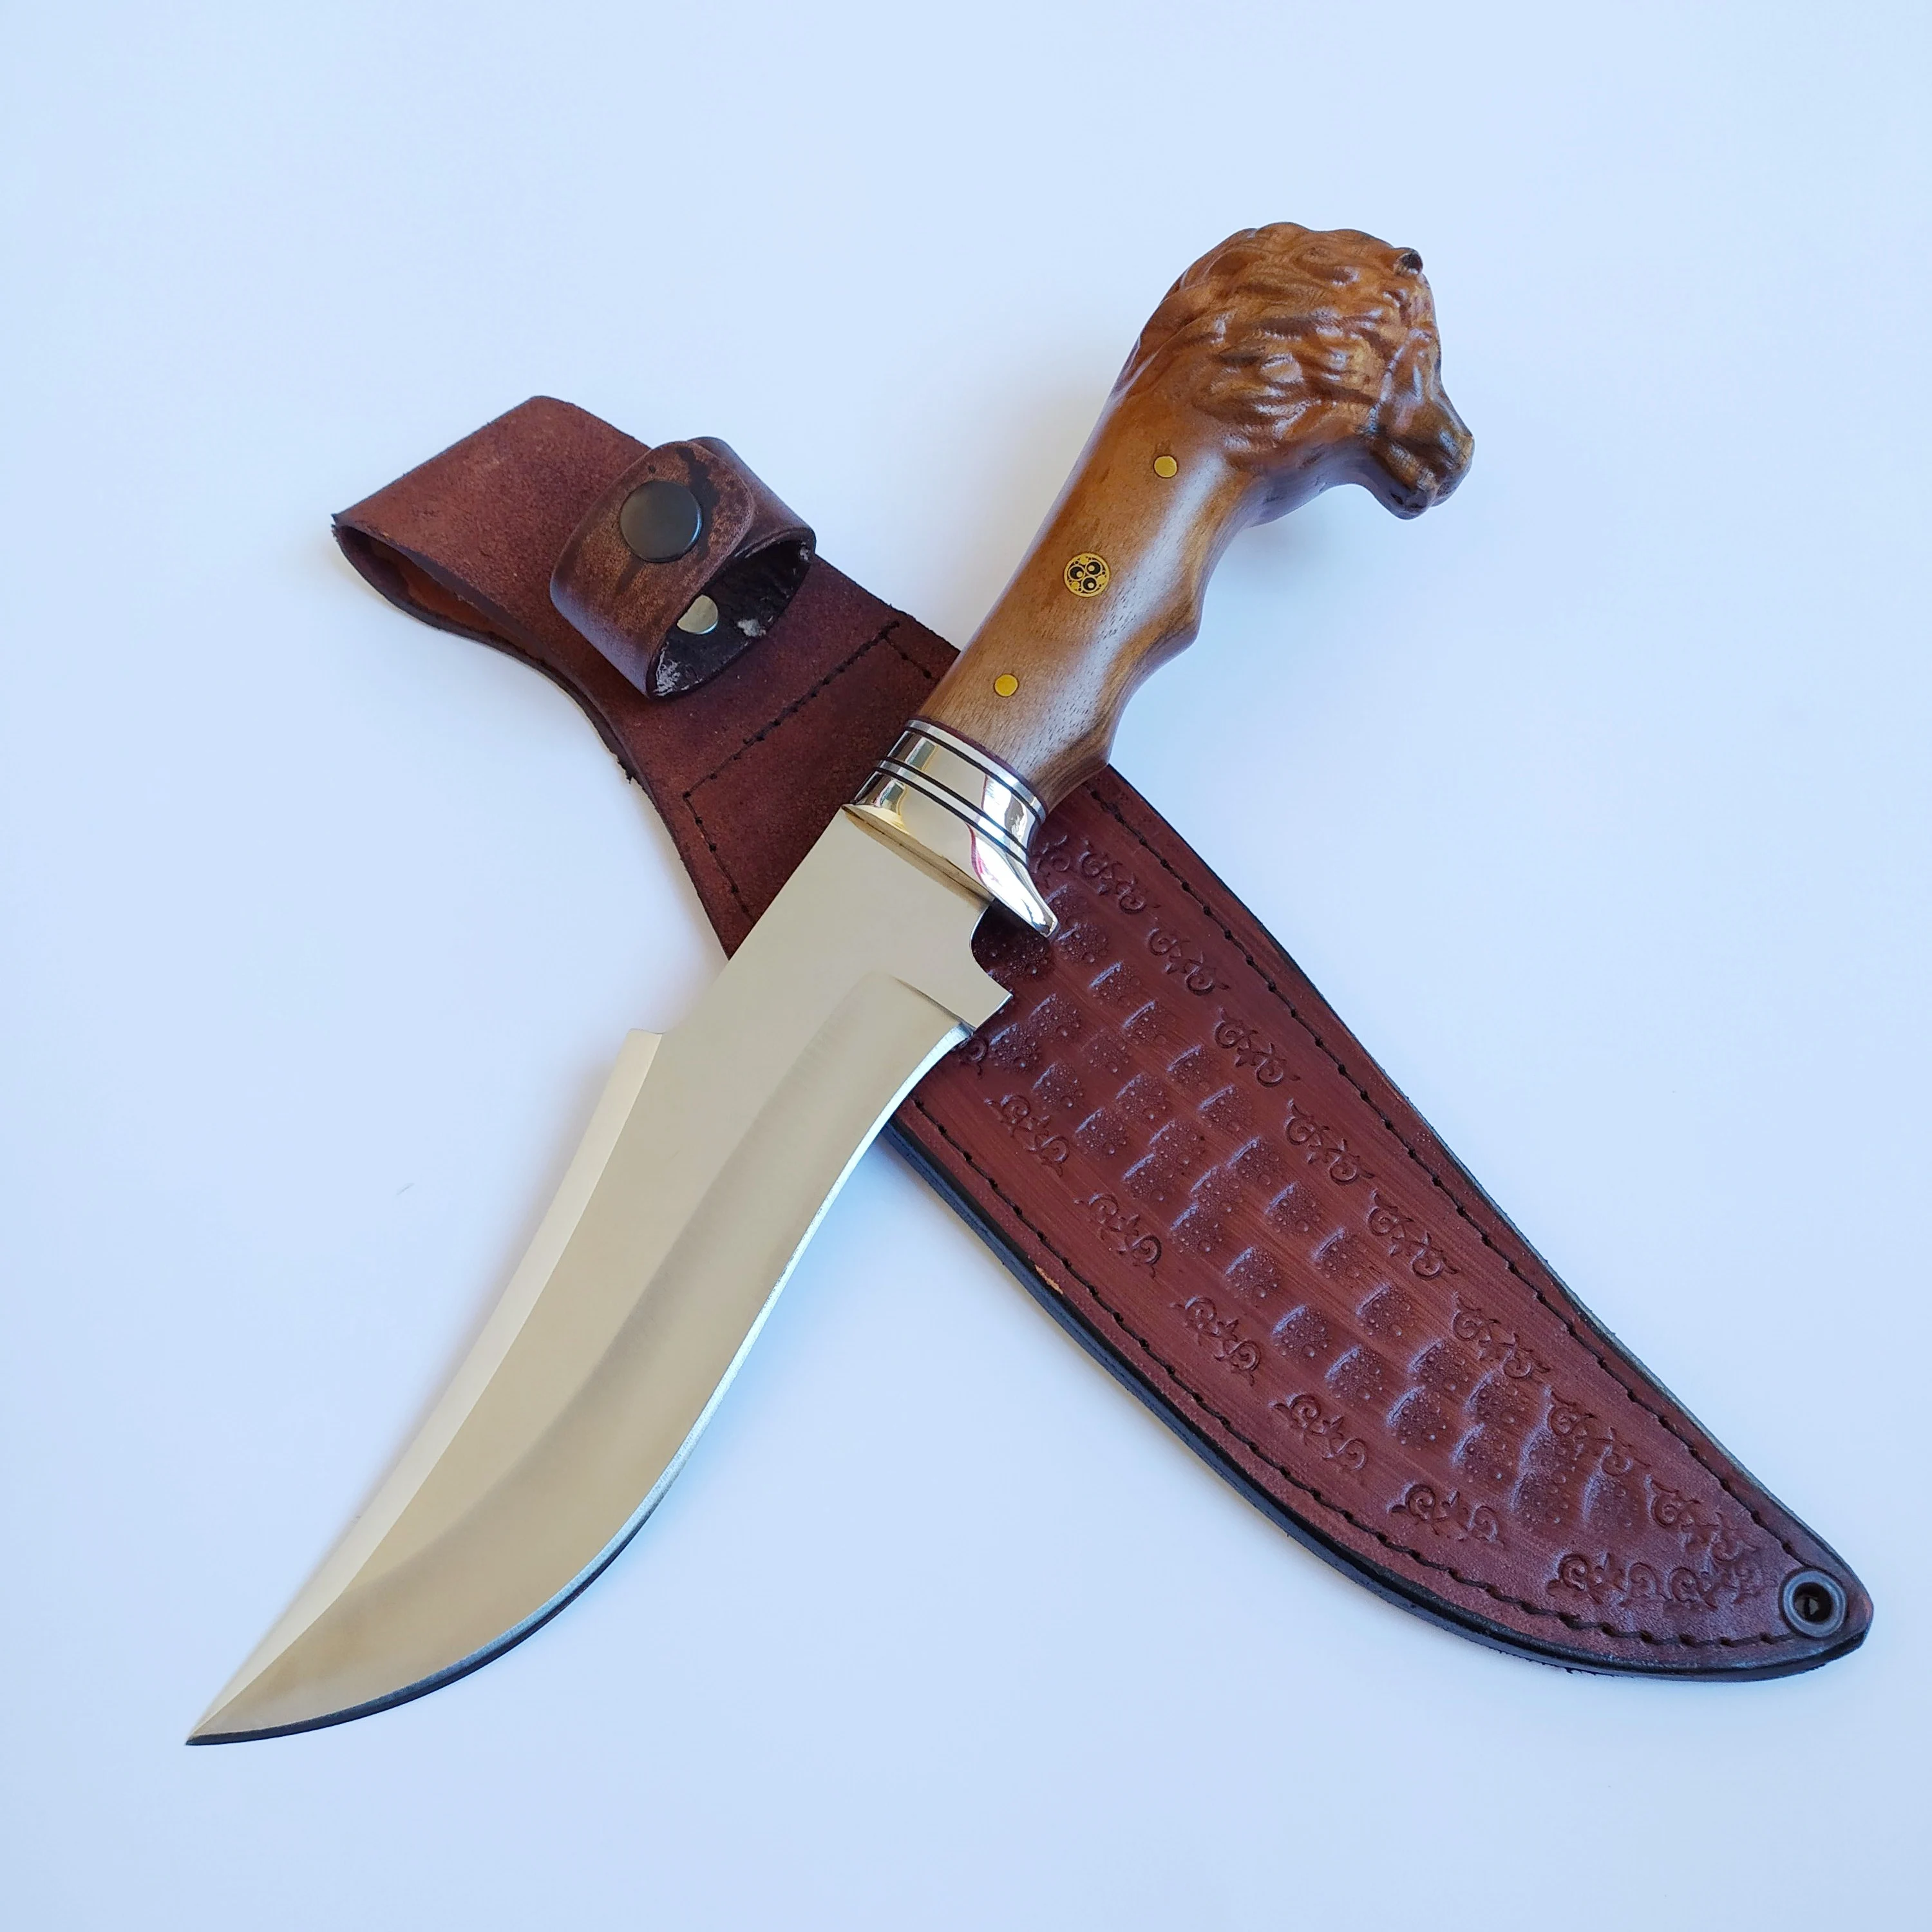 

Handmade Forged Steel Lion Head Knife Walnut Handle Cowhide Sheath Outdoor Blade Hunting Camping Wedge Personalized Gift Knives